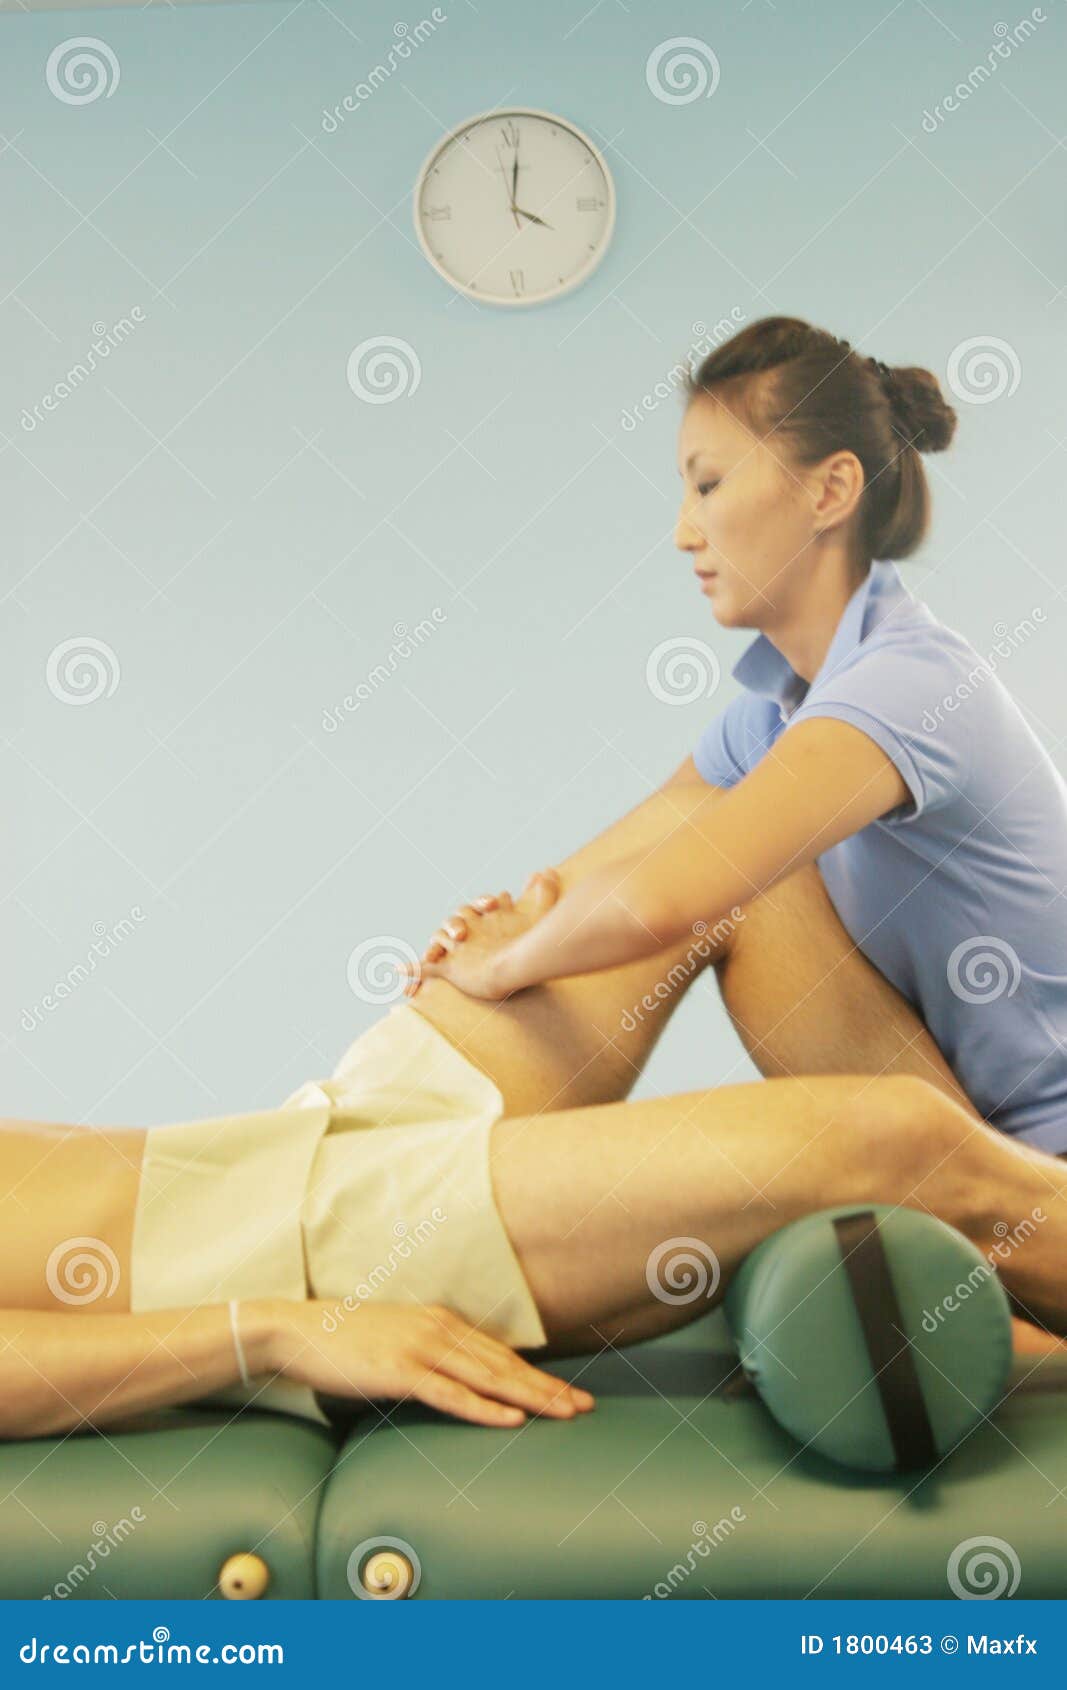 Massage Therapist Giving A Massage Stock Image Image Of Healthy